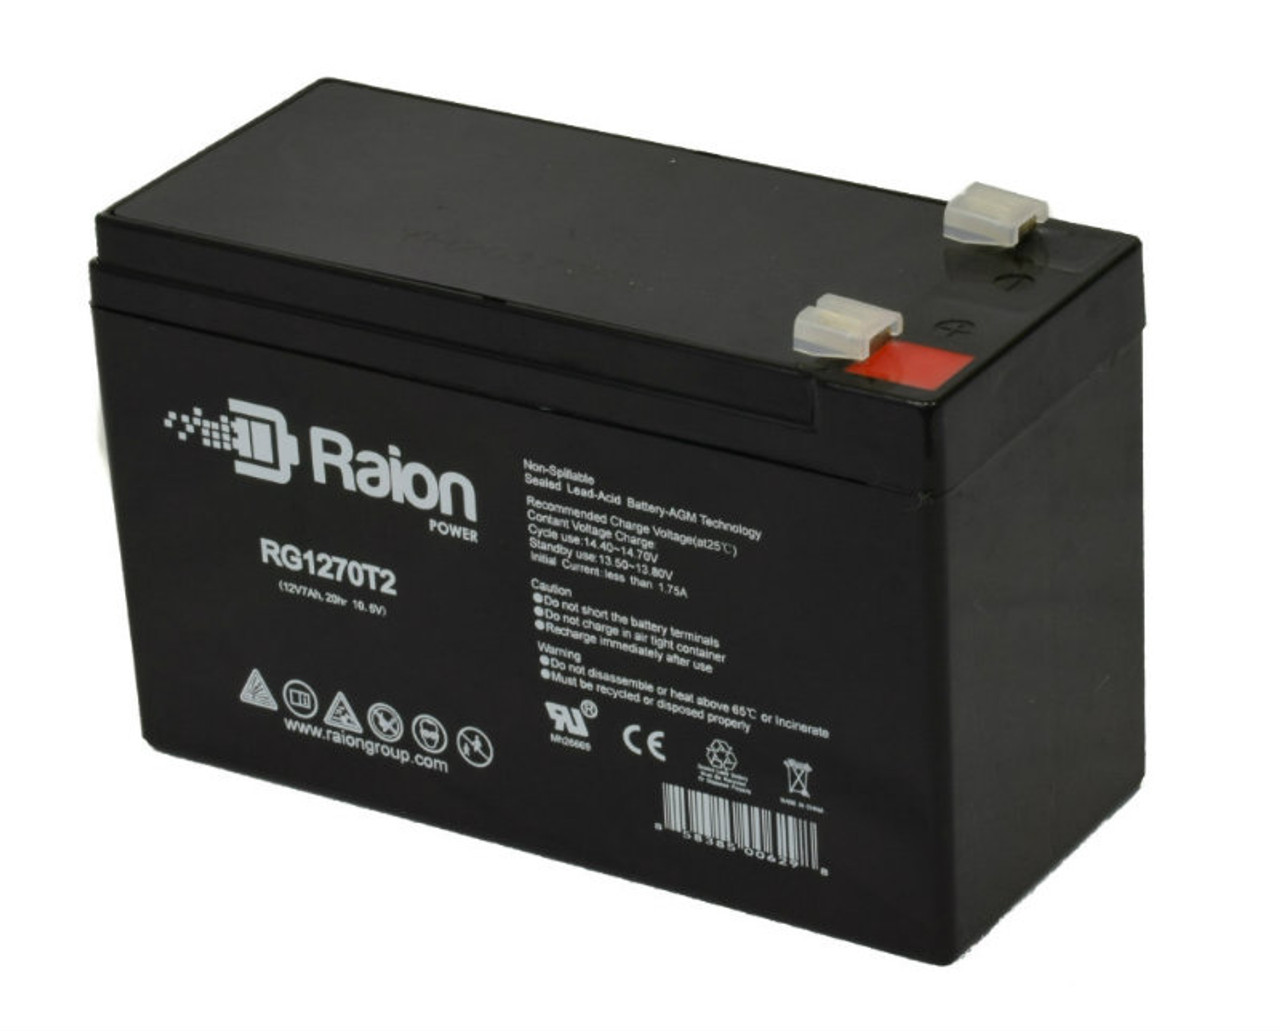 Raion Power RG1270T1 12V 7Ah Non-Spillable Replacement Battery for Ultratech UT-1270